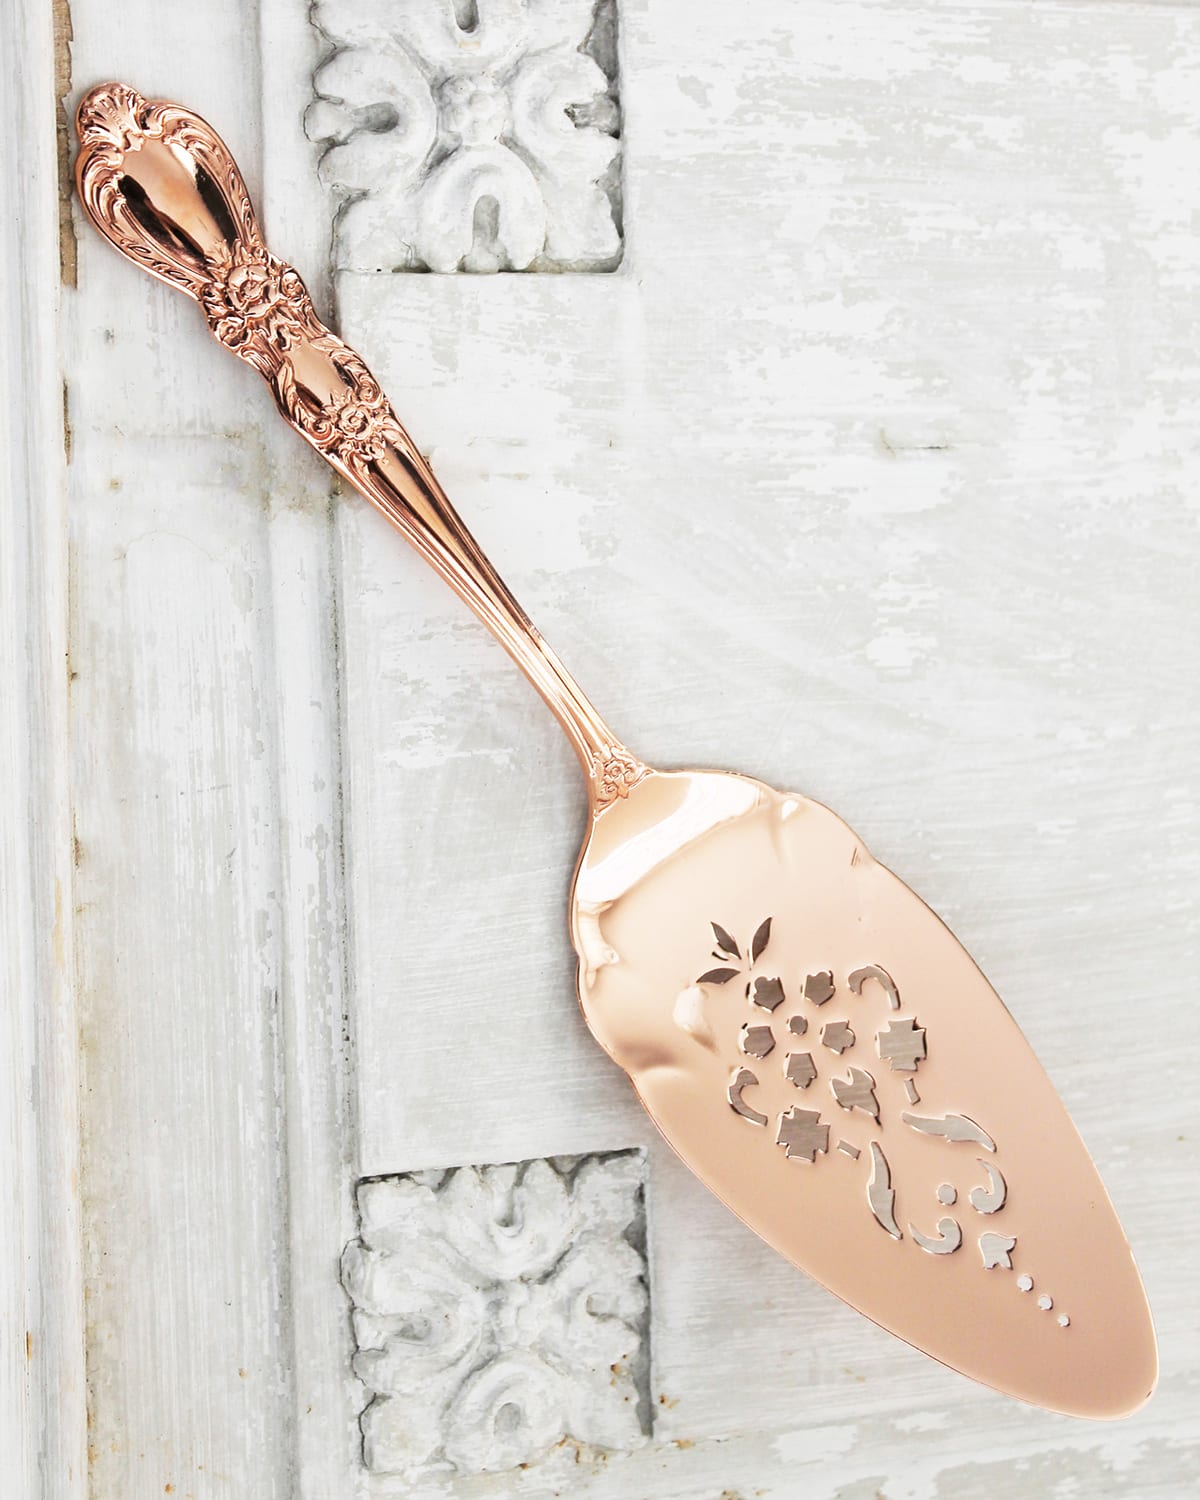 Coppermill Kitchen Vintage Inspired Measuring Spoons